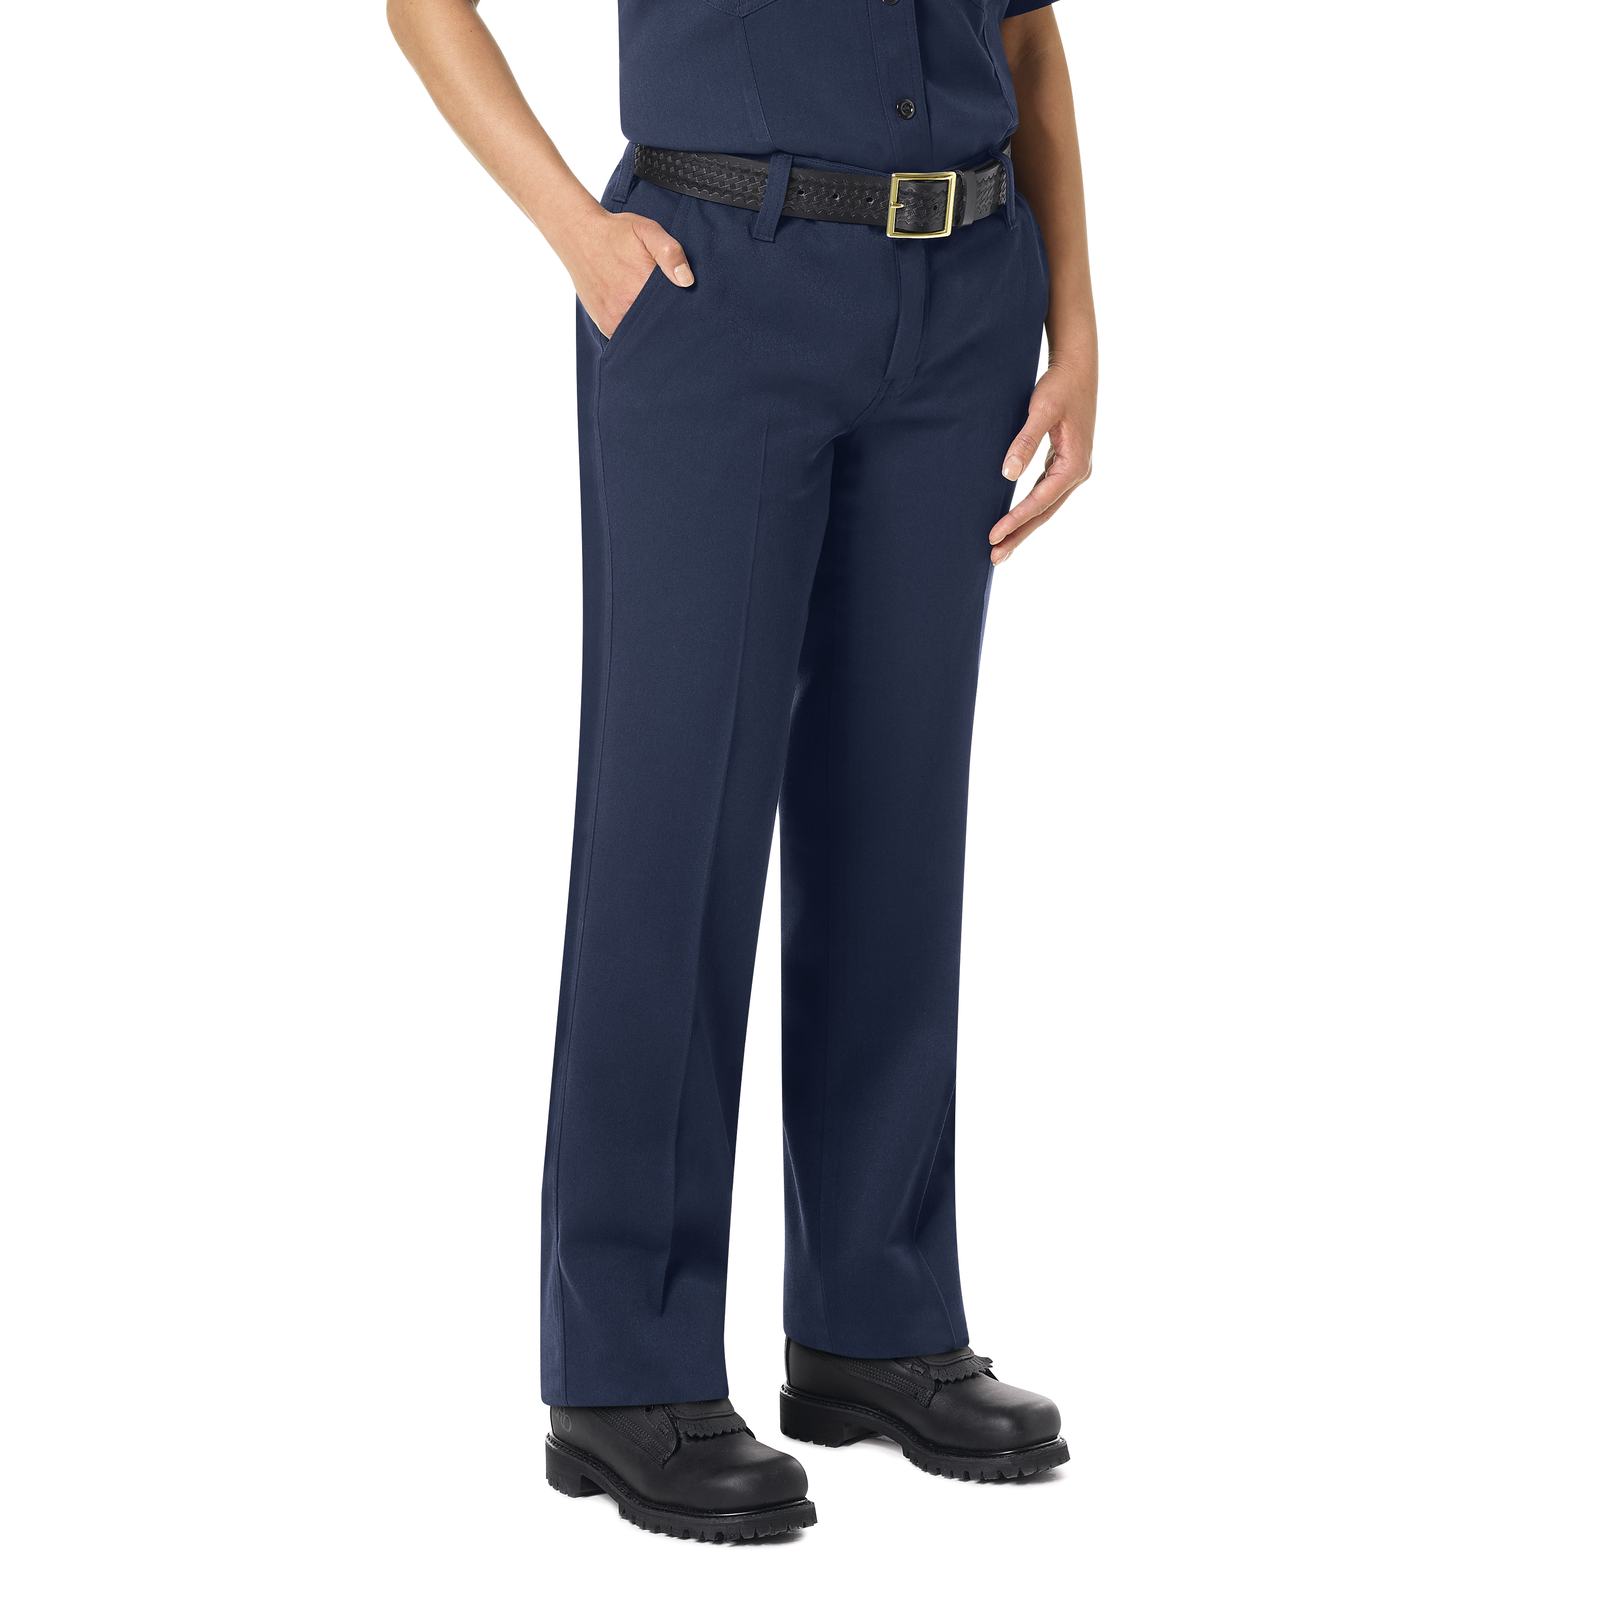 Dickies Work Pants Womens Size 14 Reg Navy Blue NEW with Tags